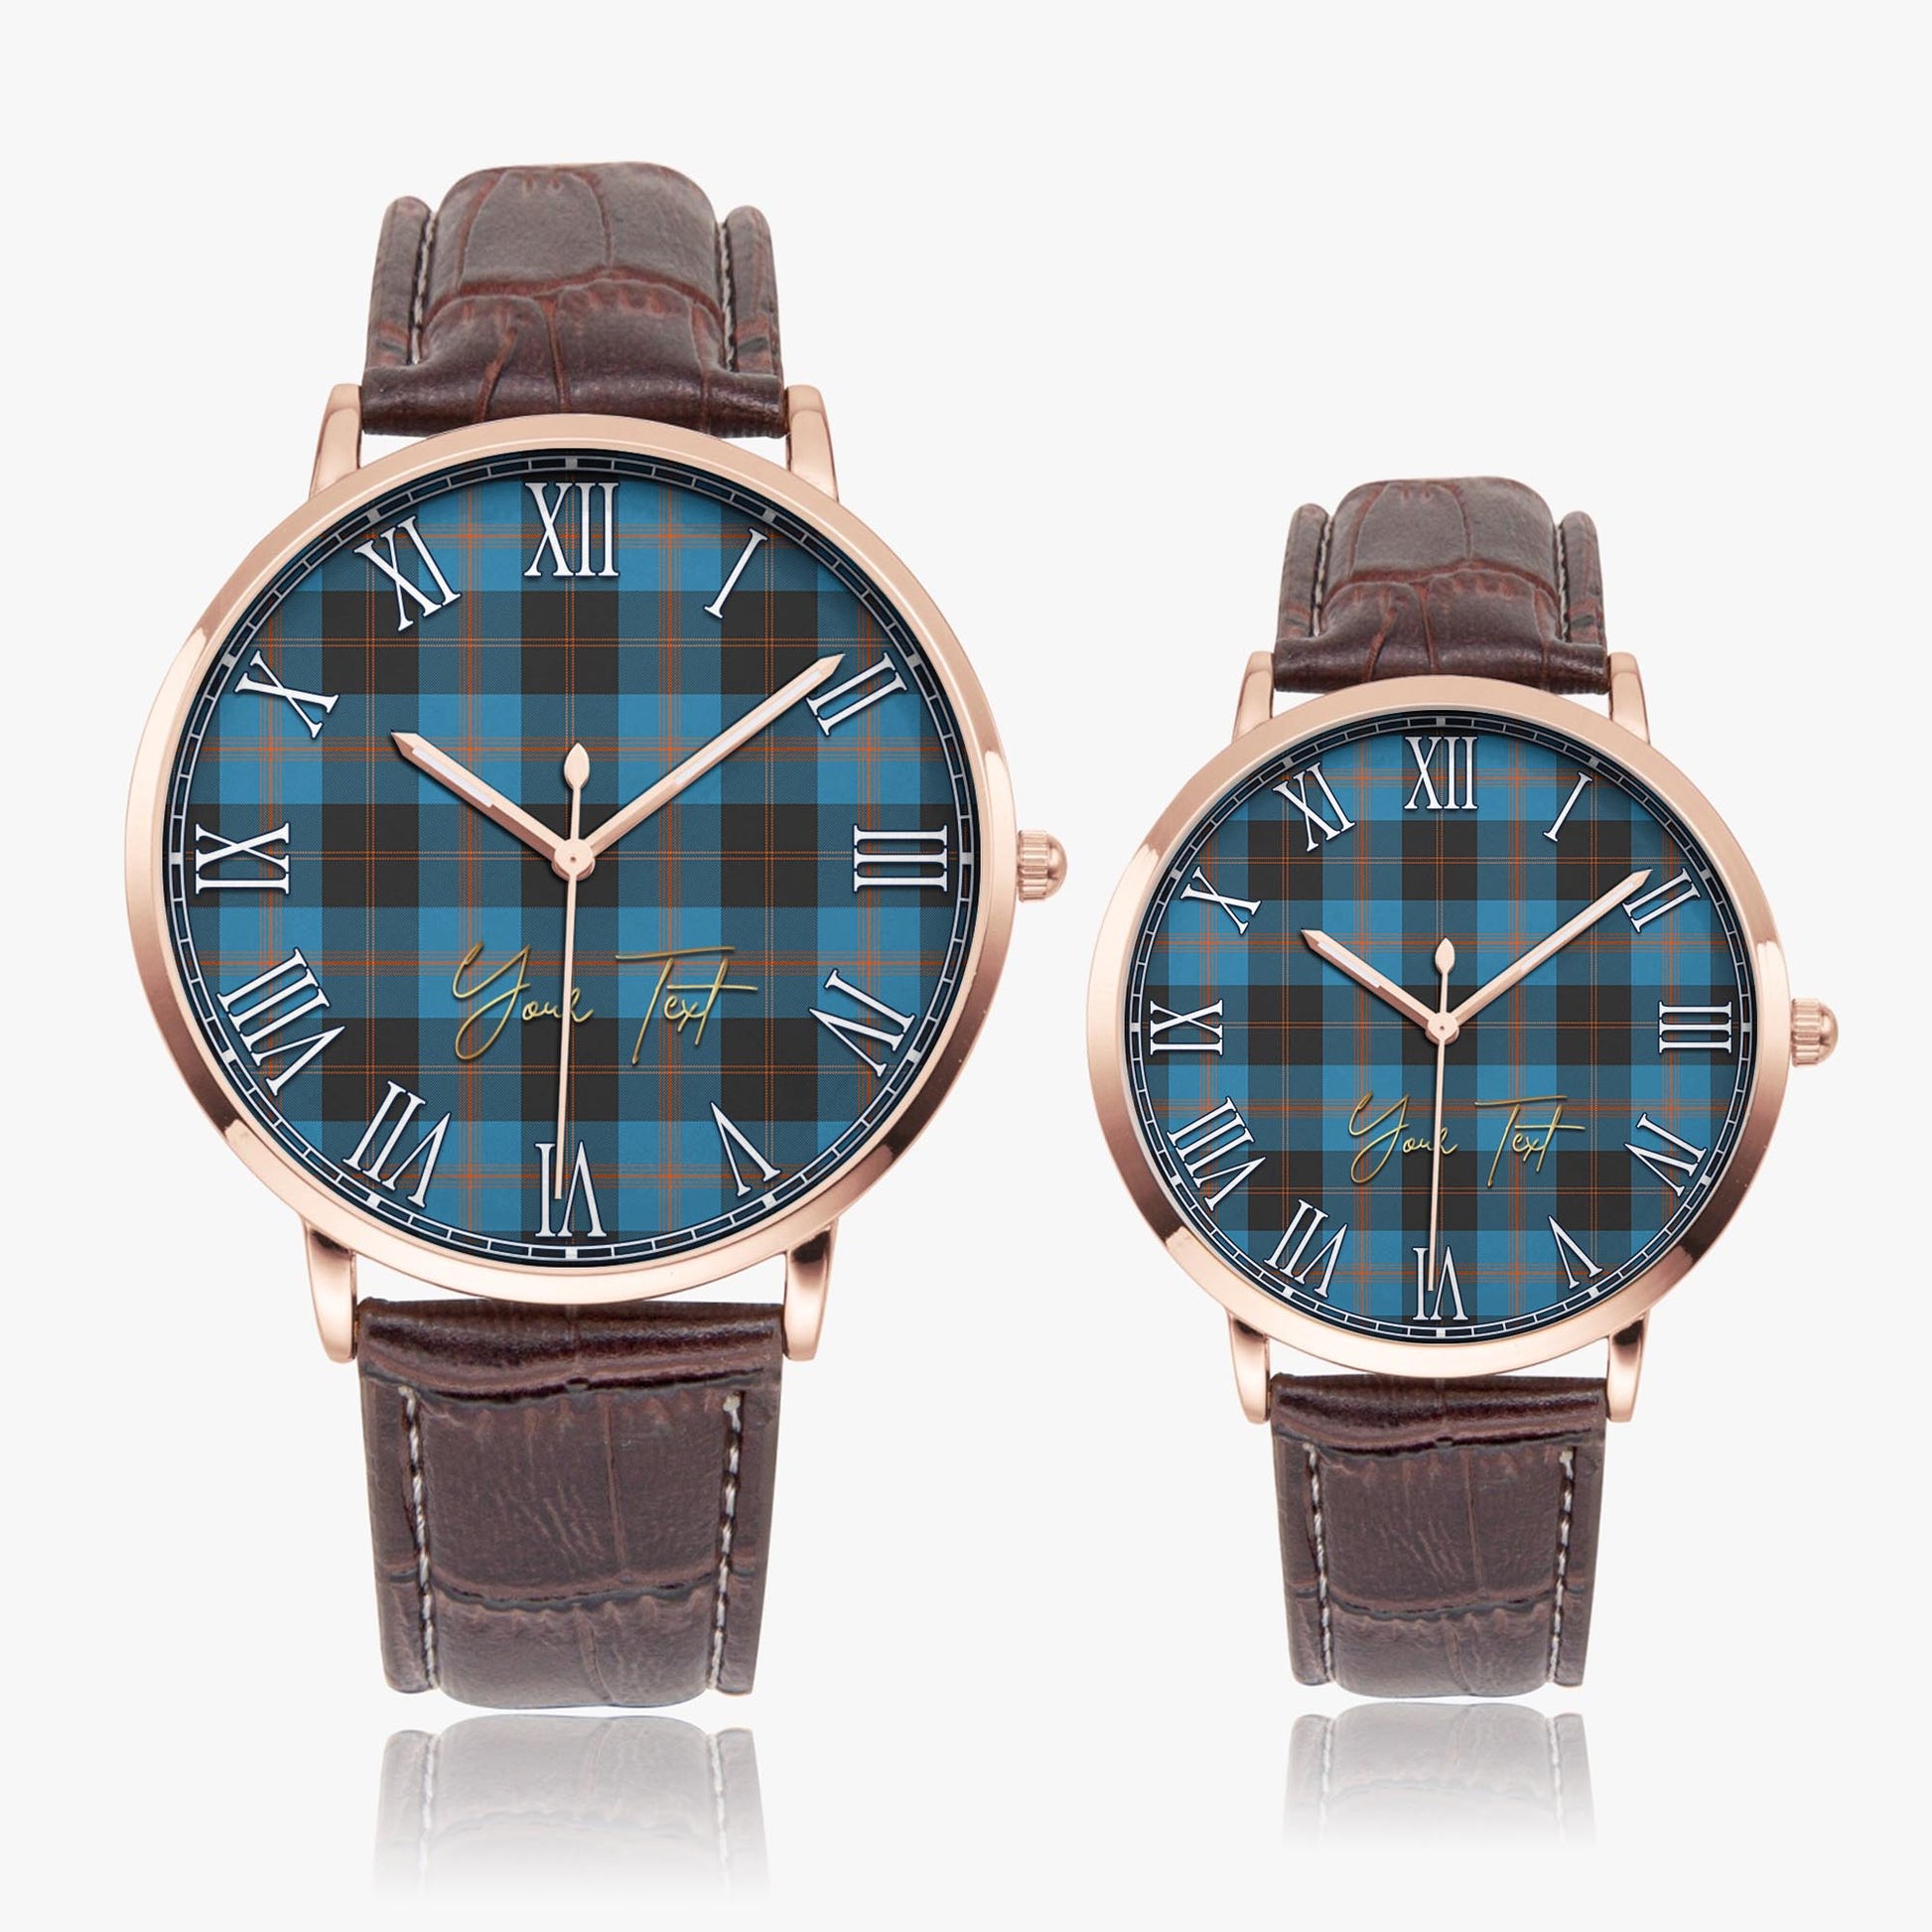 Garden Tartan Personalized Your Text Leather Trap Quartz Watch Ultra Thin Rose Gold Case With Brown Leather Strap - Tartanvibesclothing